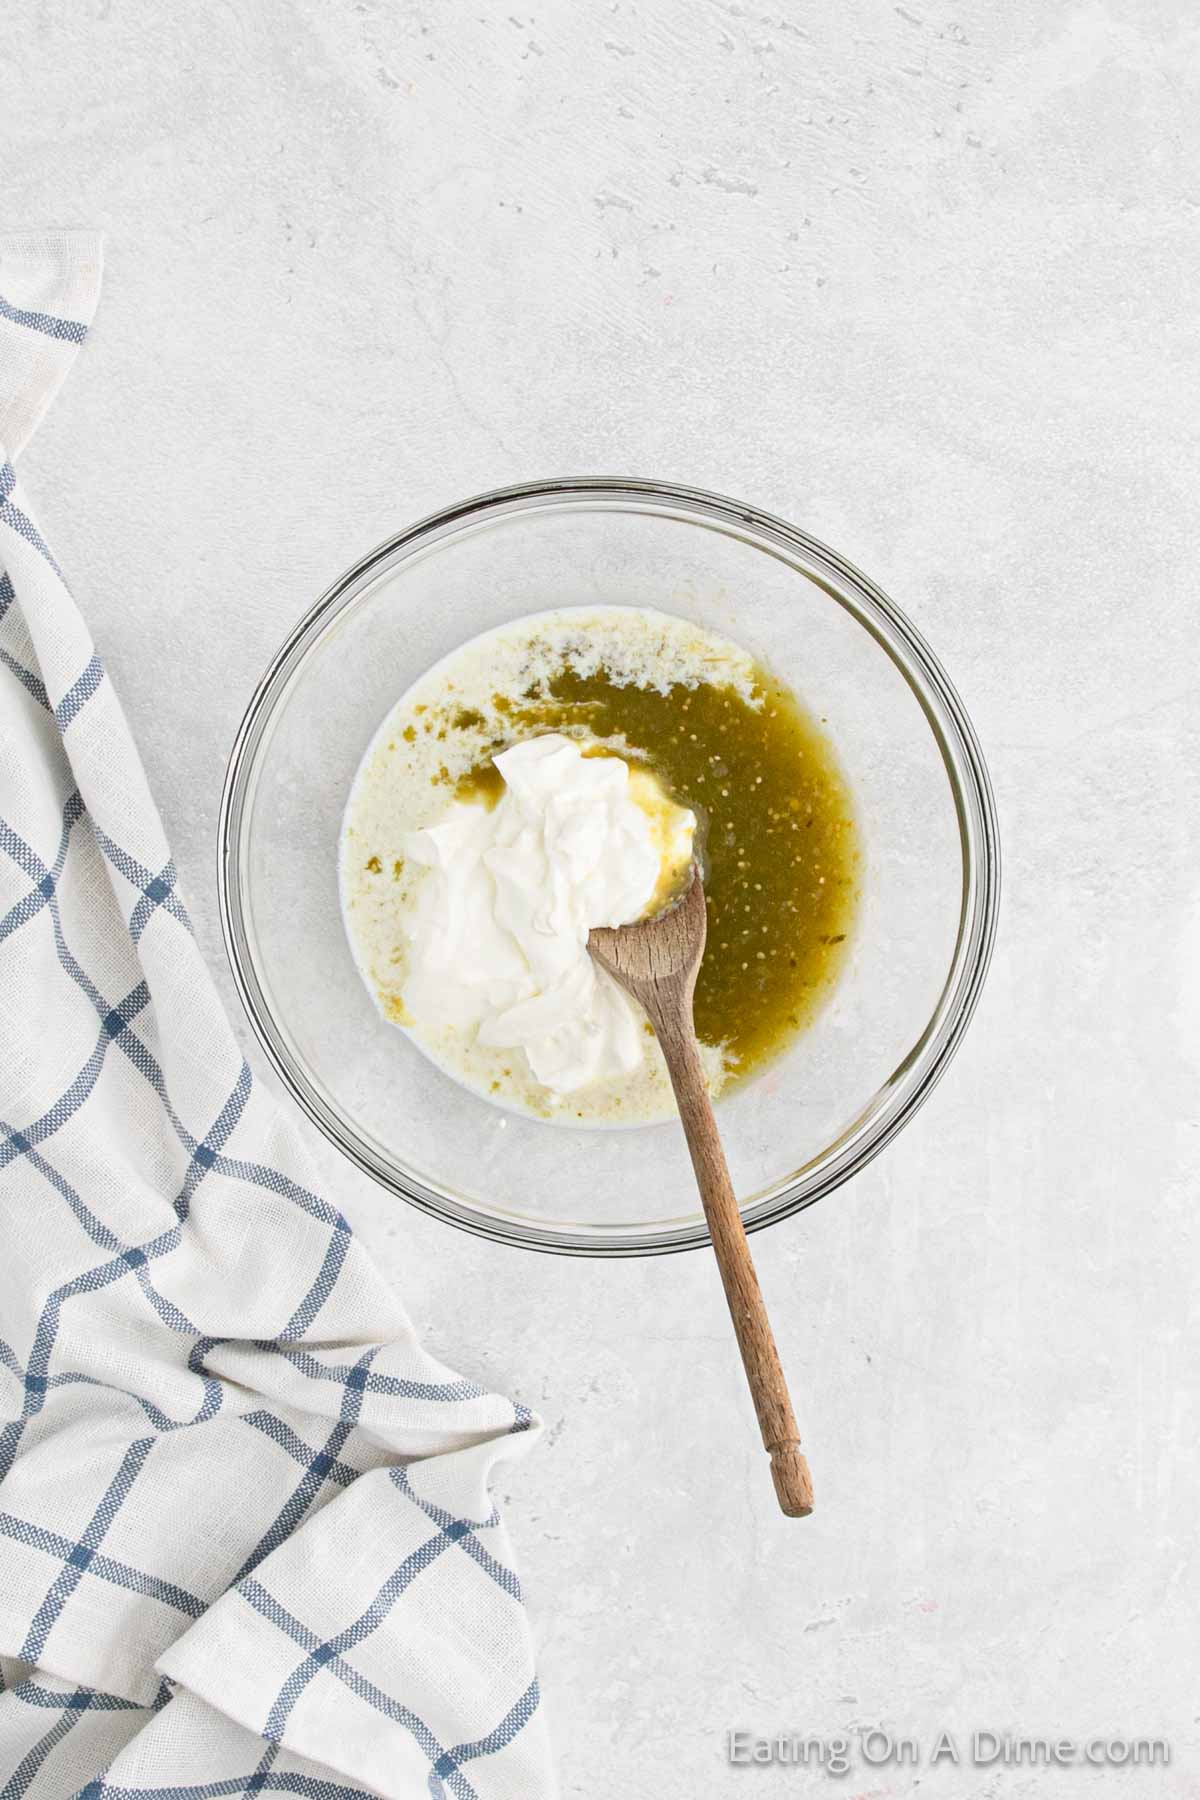 Combining salsa verde, sour cream and milk in a bowl with a wooden spoon